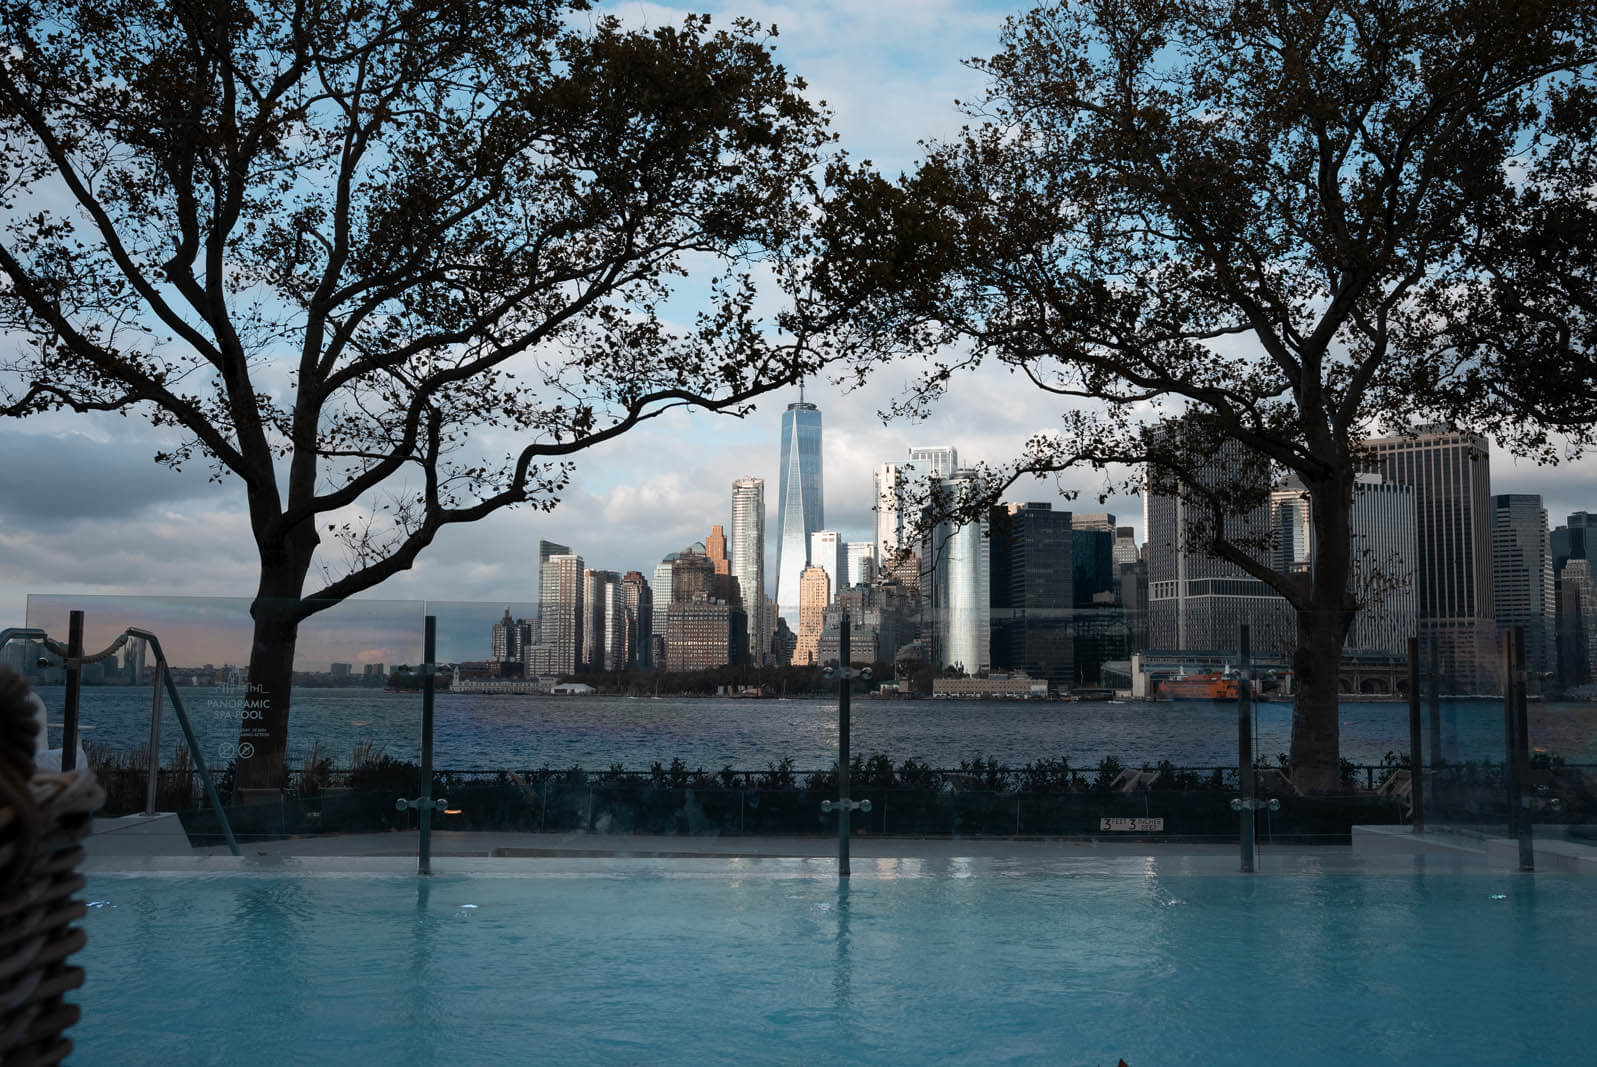 QCNY Spa outdoor heated pool on Governors Island with a view of the World Trade Center and city skyline